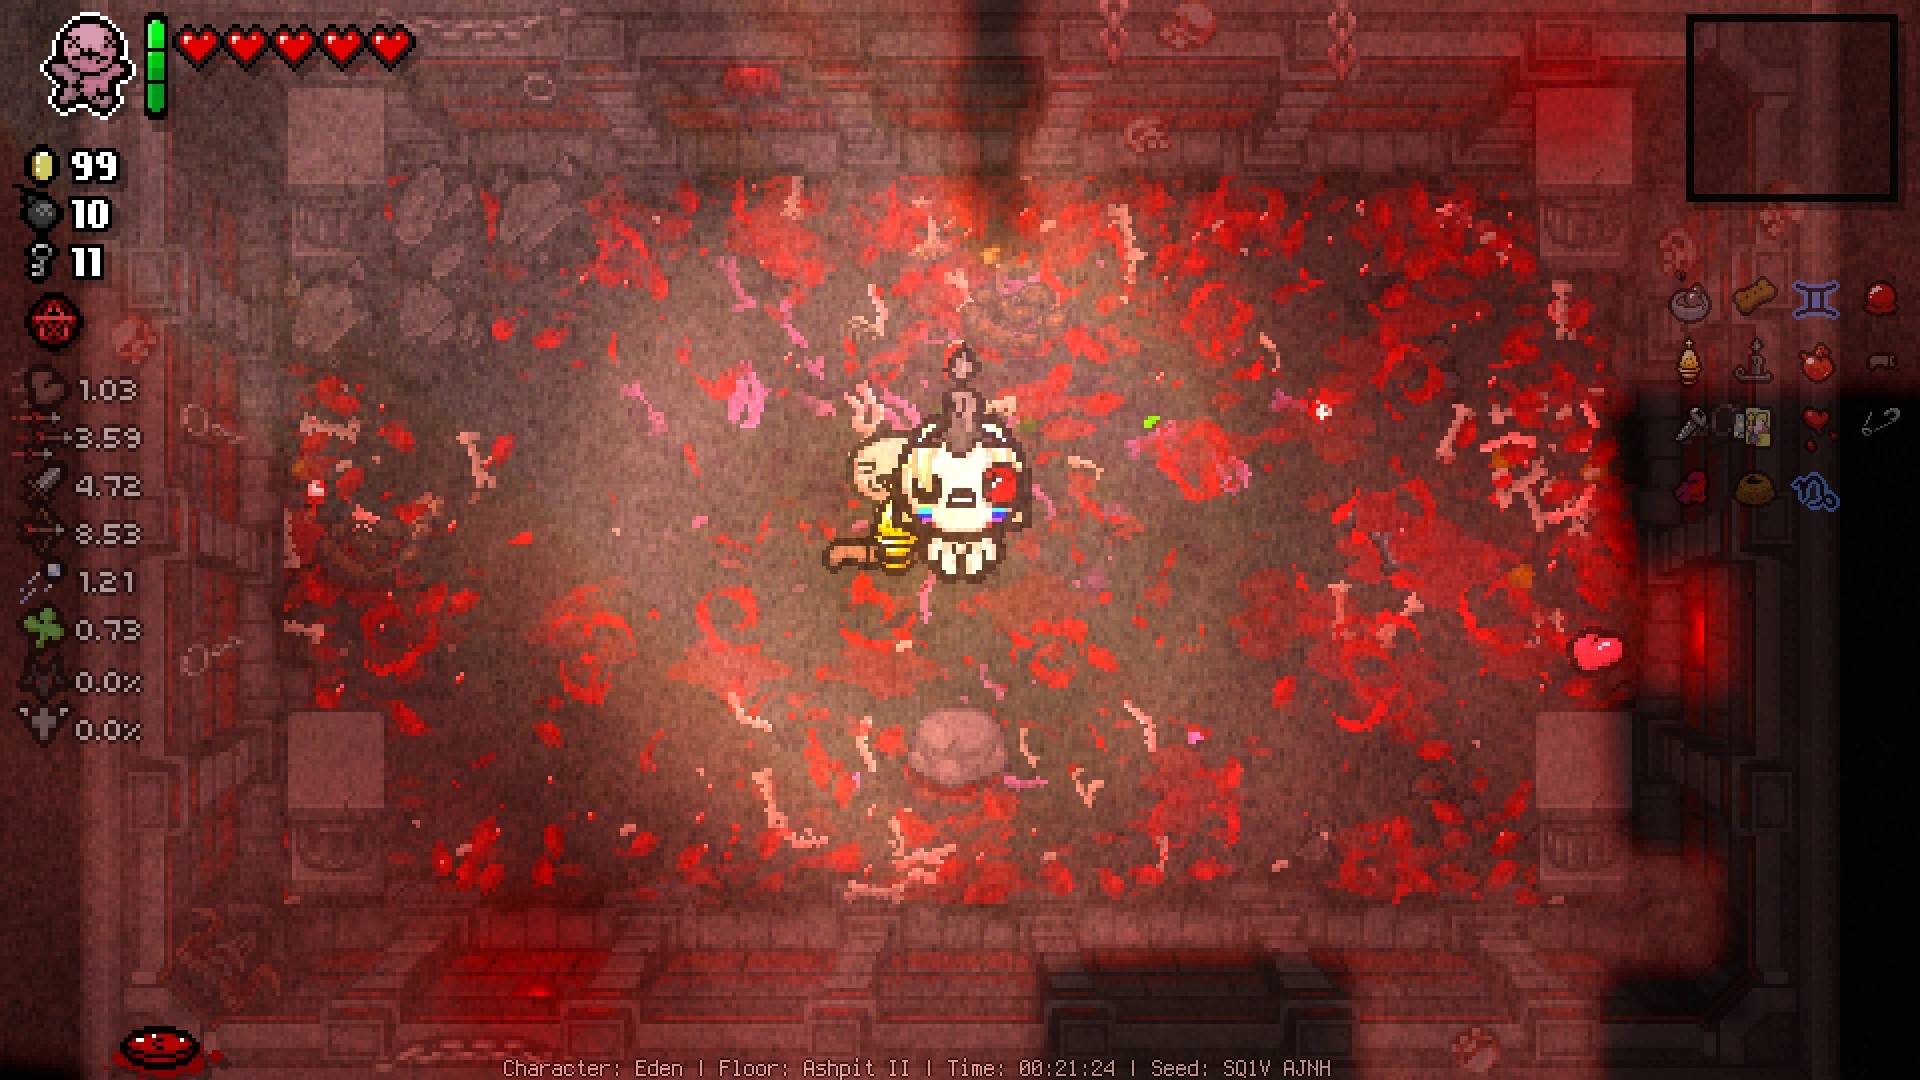 binding of isaac rebith with antibirth download